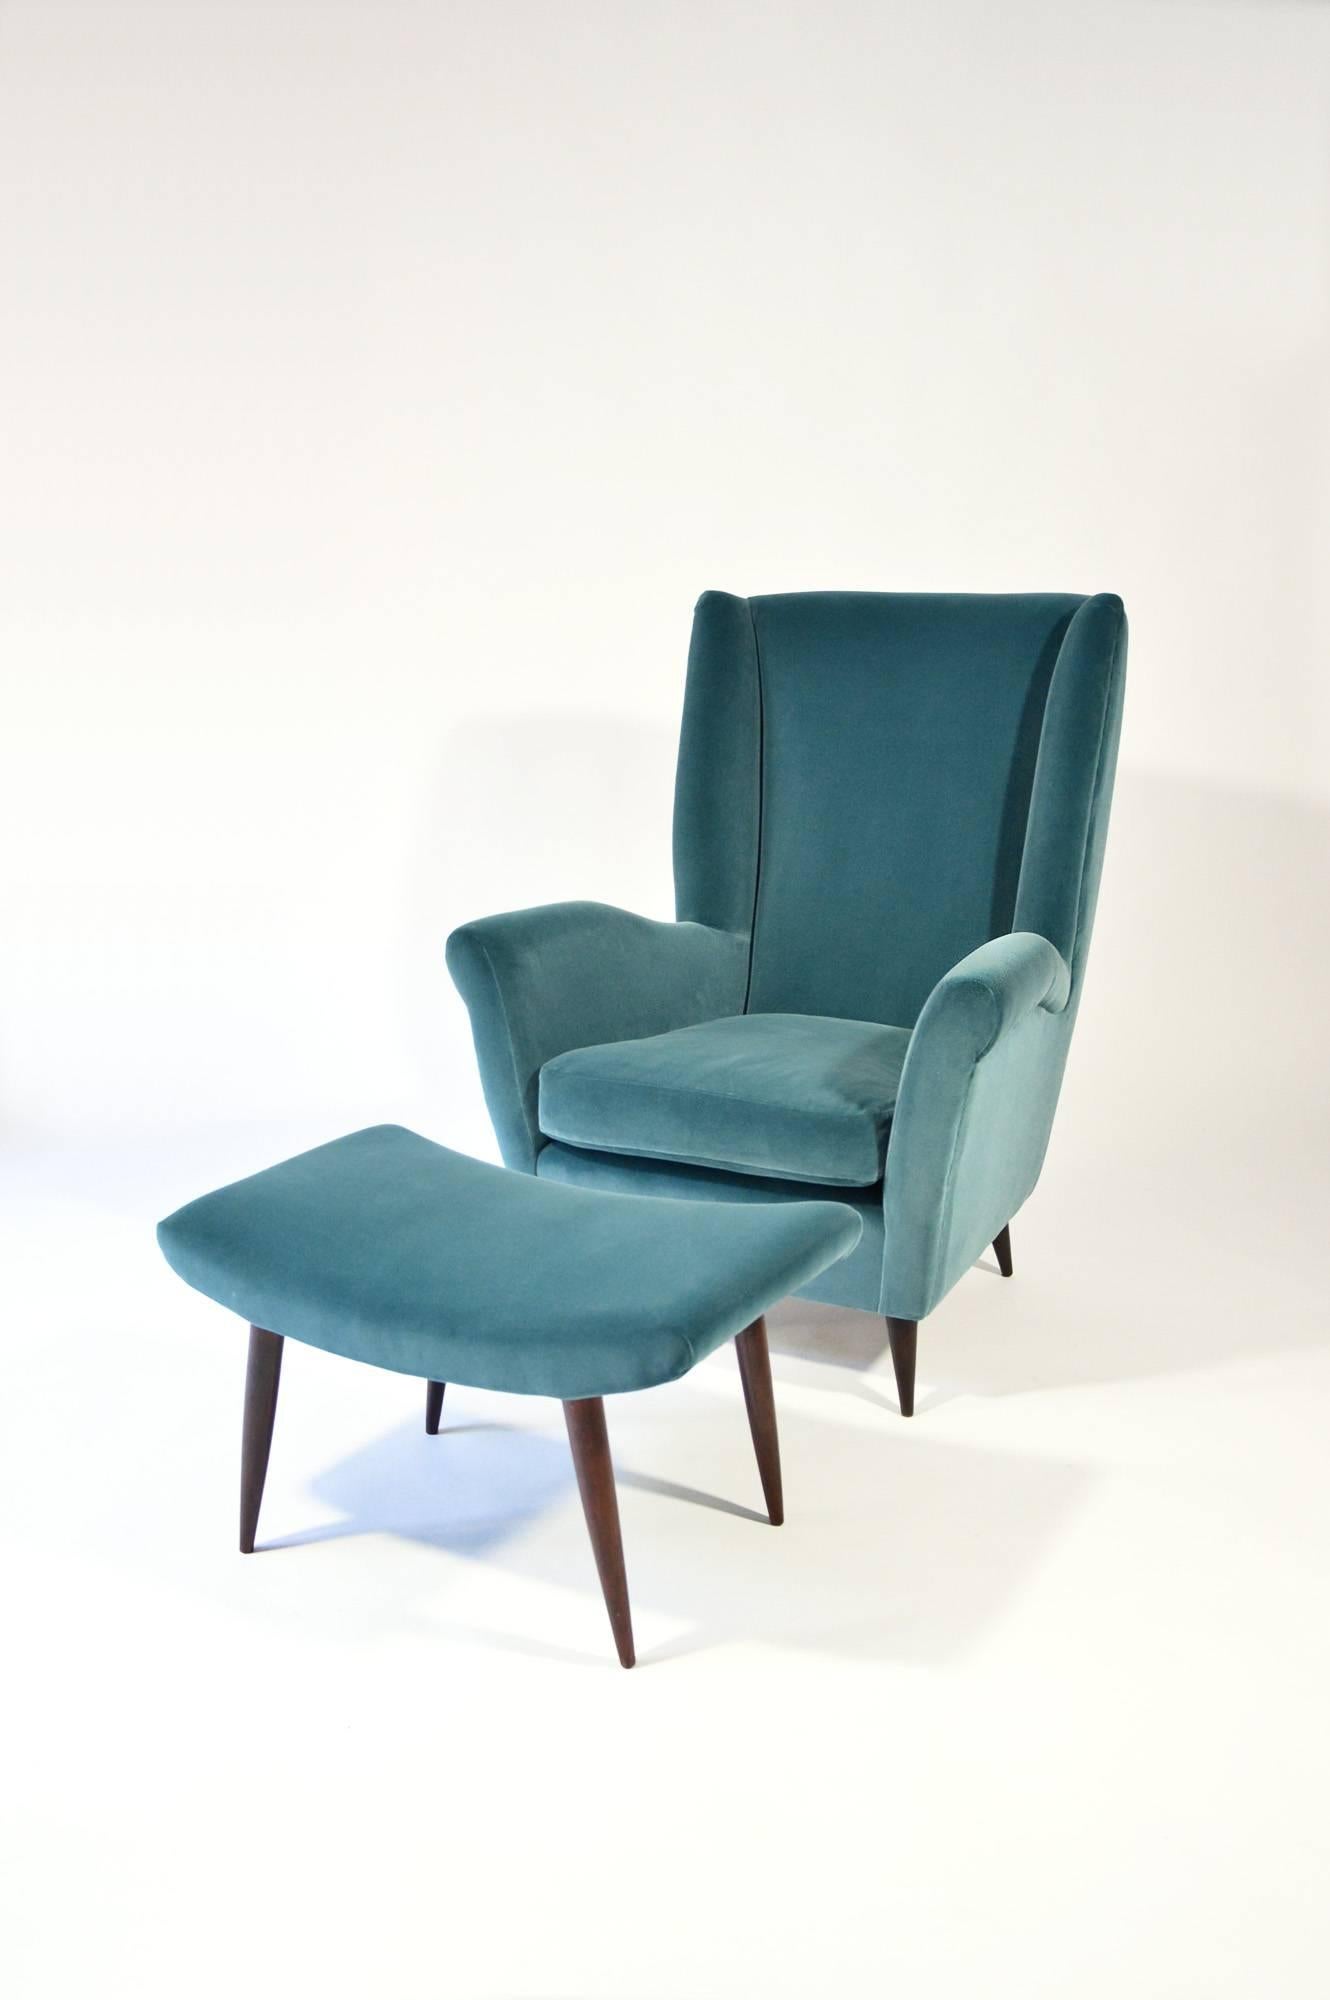 Very comfortable and elegant high-back armchair and footstool with conical wooden legs, designed by Gio Ponti circa 1950, re-uphostered with high quality stone blue cotton velvet. In excellent condition.